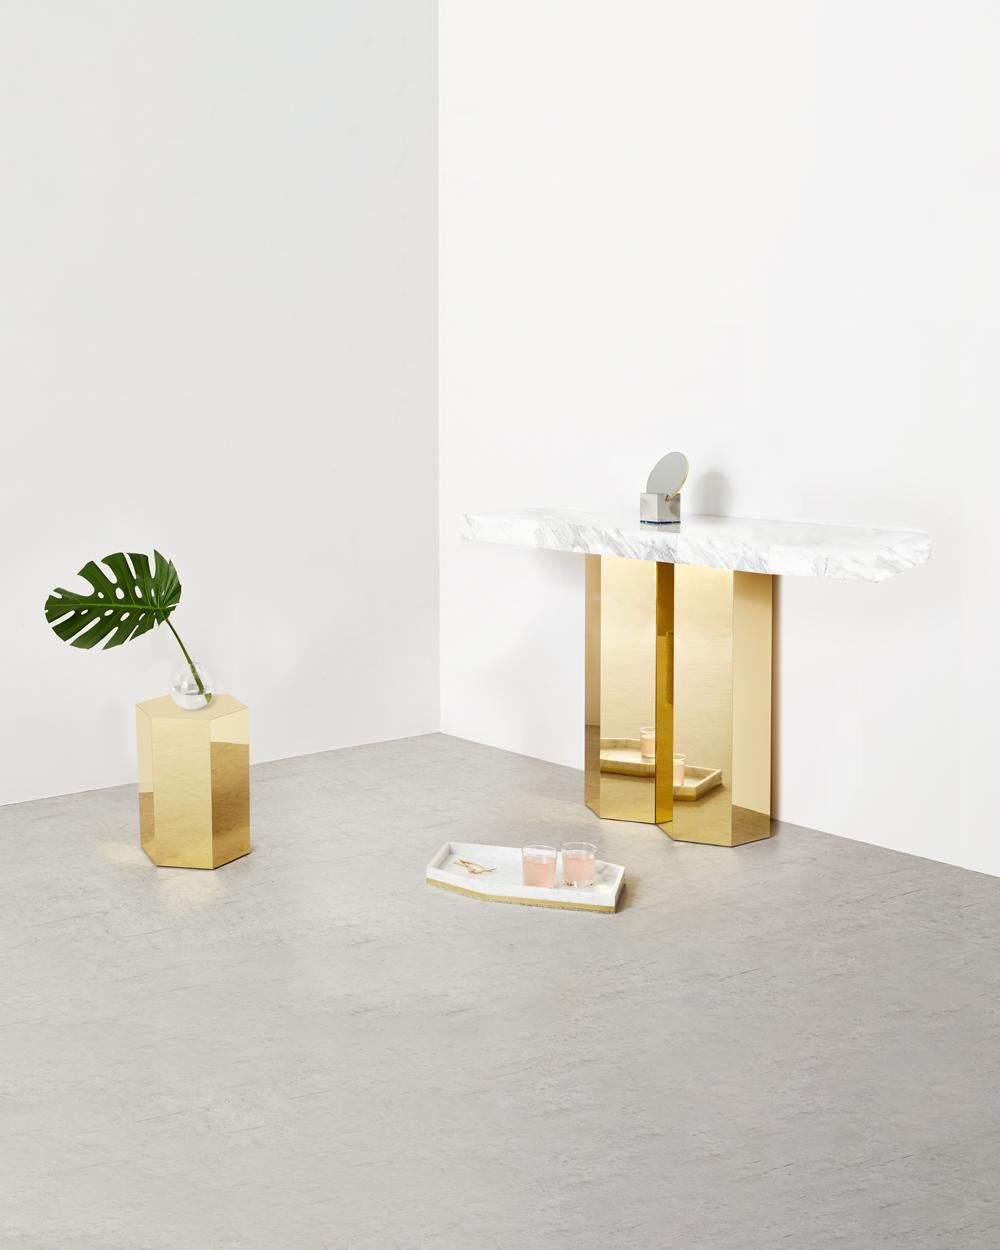 The double hex console consists of calacatta marble table top supported with brass hexagon base. 

The base features two polished brass finish hexagons which are joined together side by side. The marble top is a five-sided polygon with a